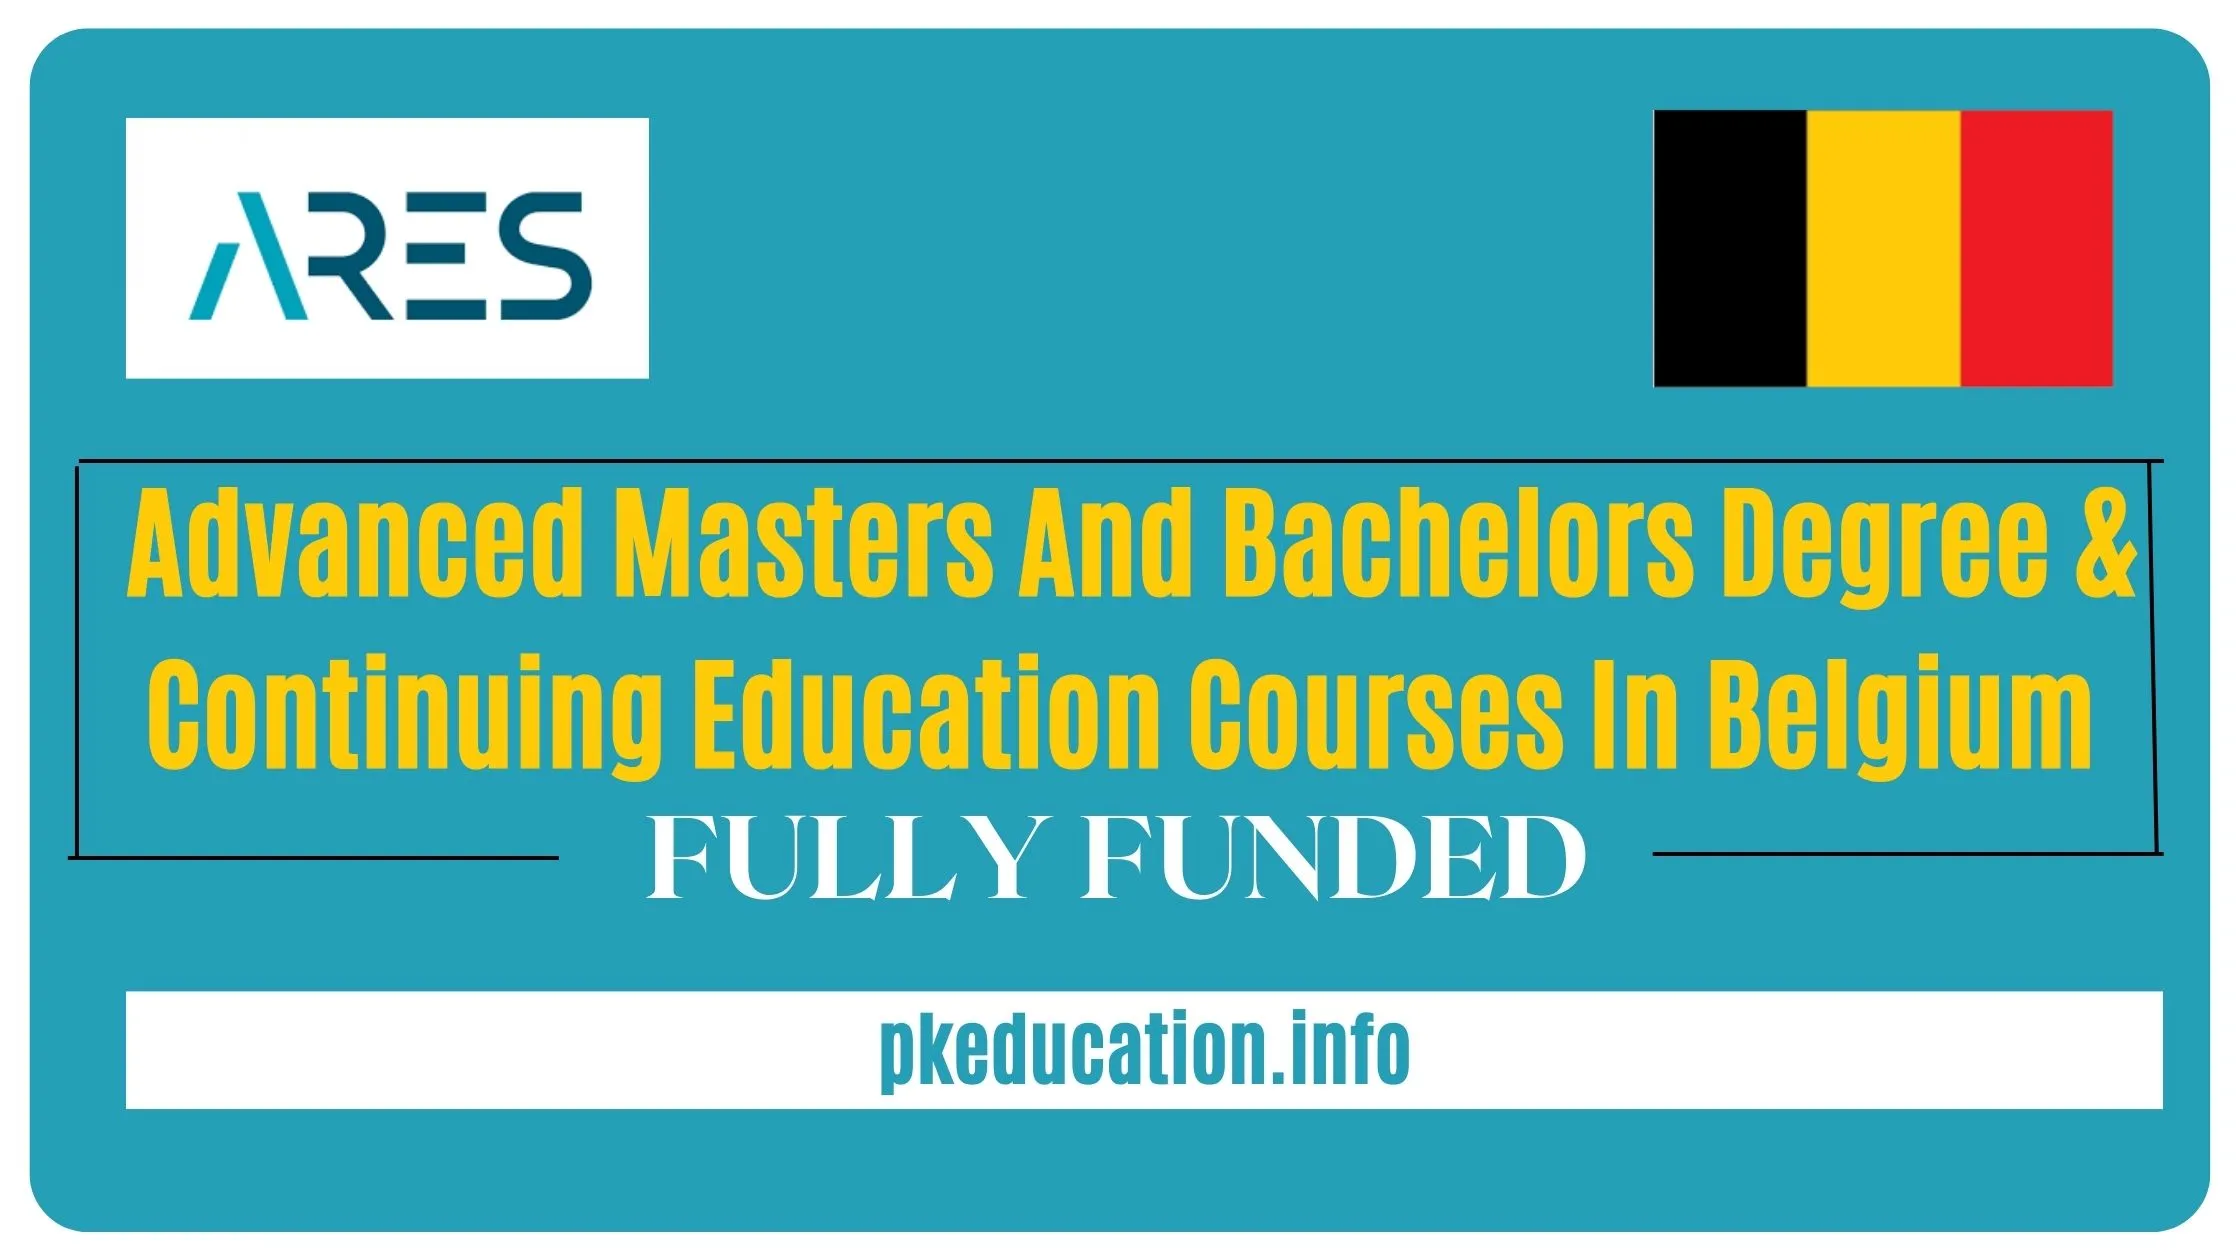 Advanced Masters And Bachelors Degree & Continuing Education Courses In Belgium